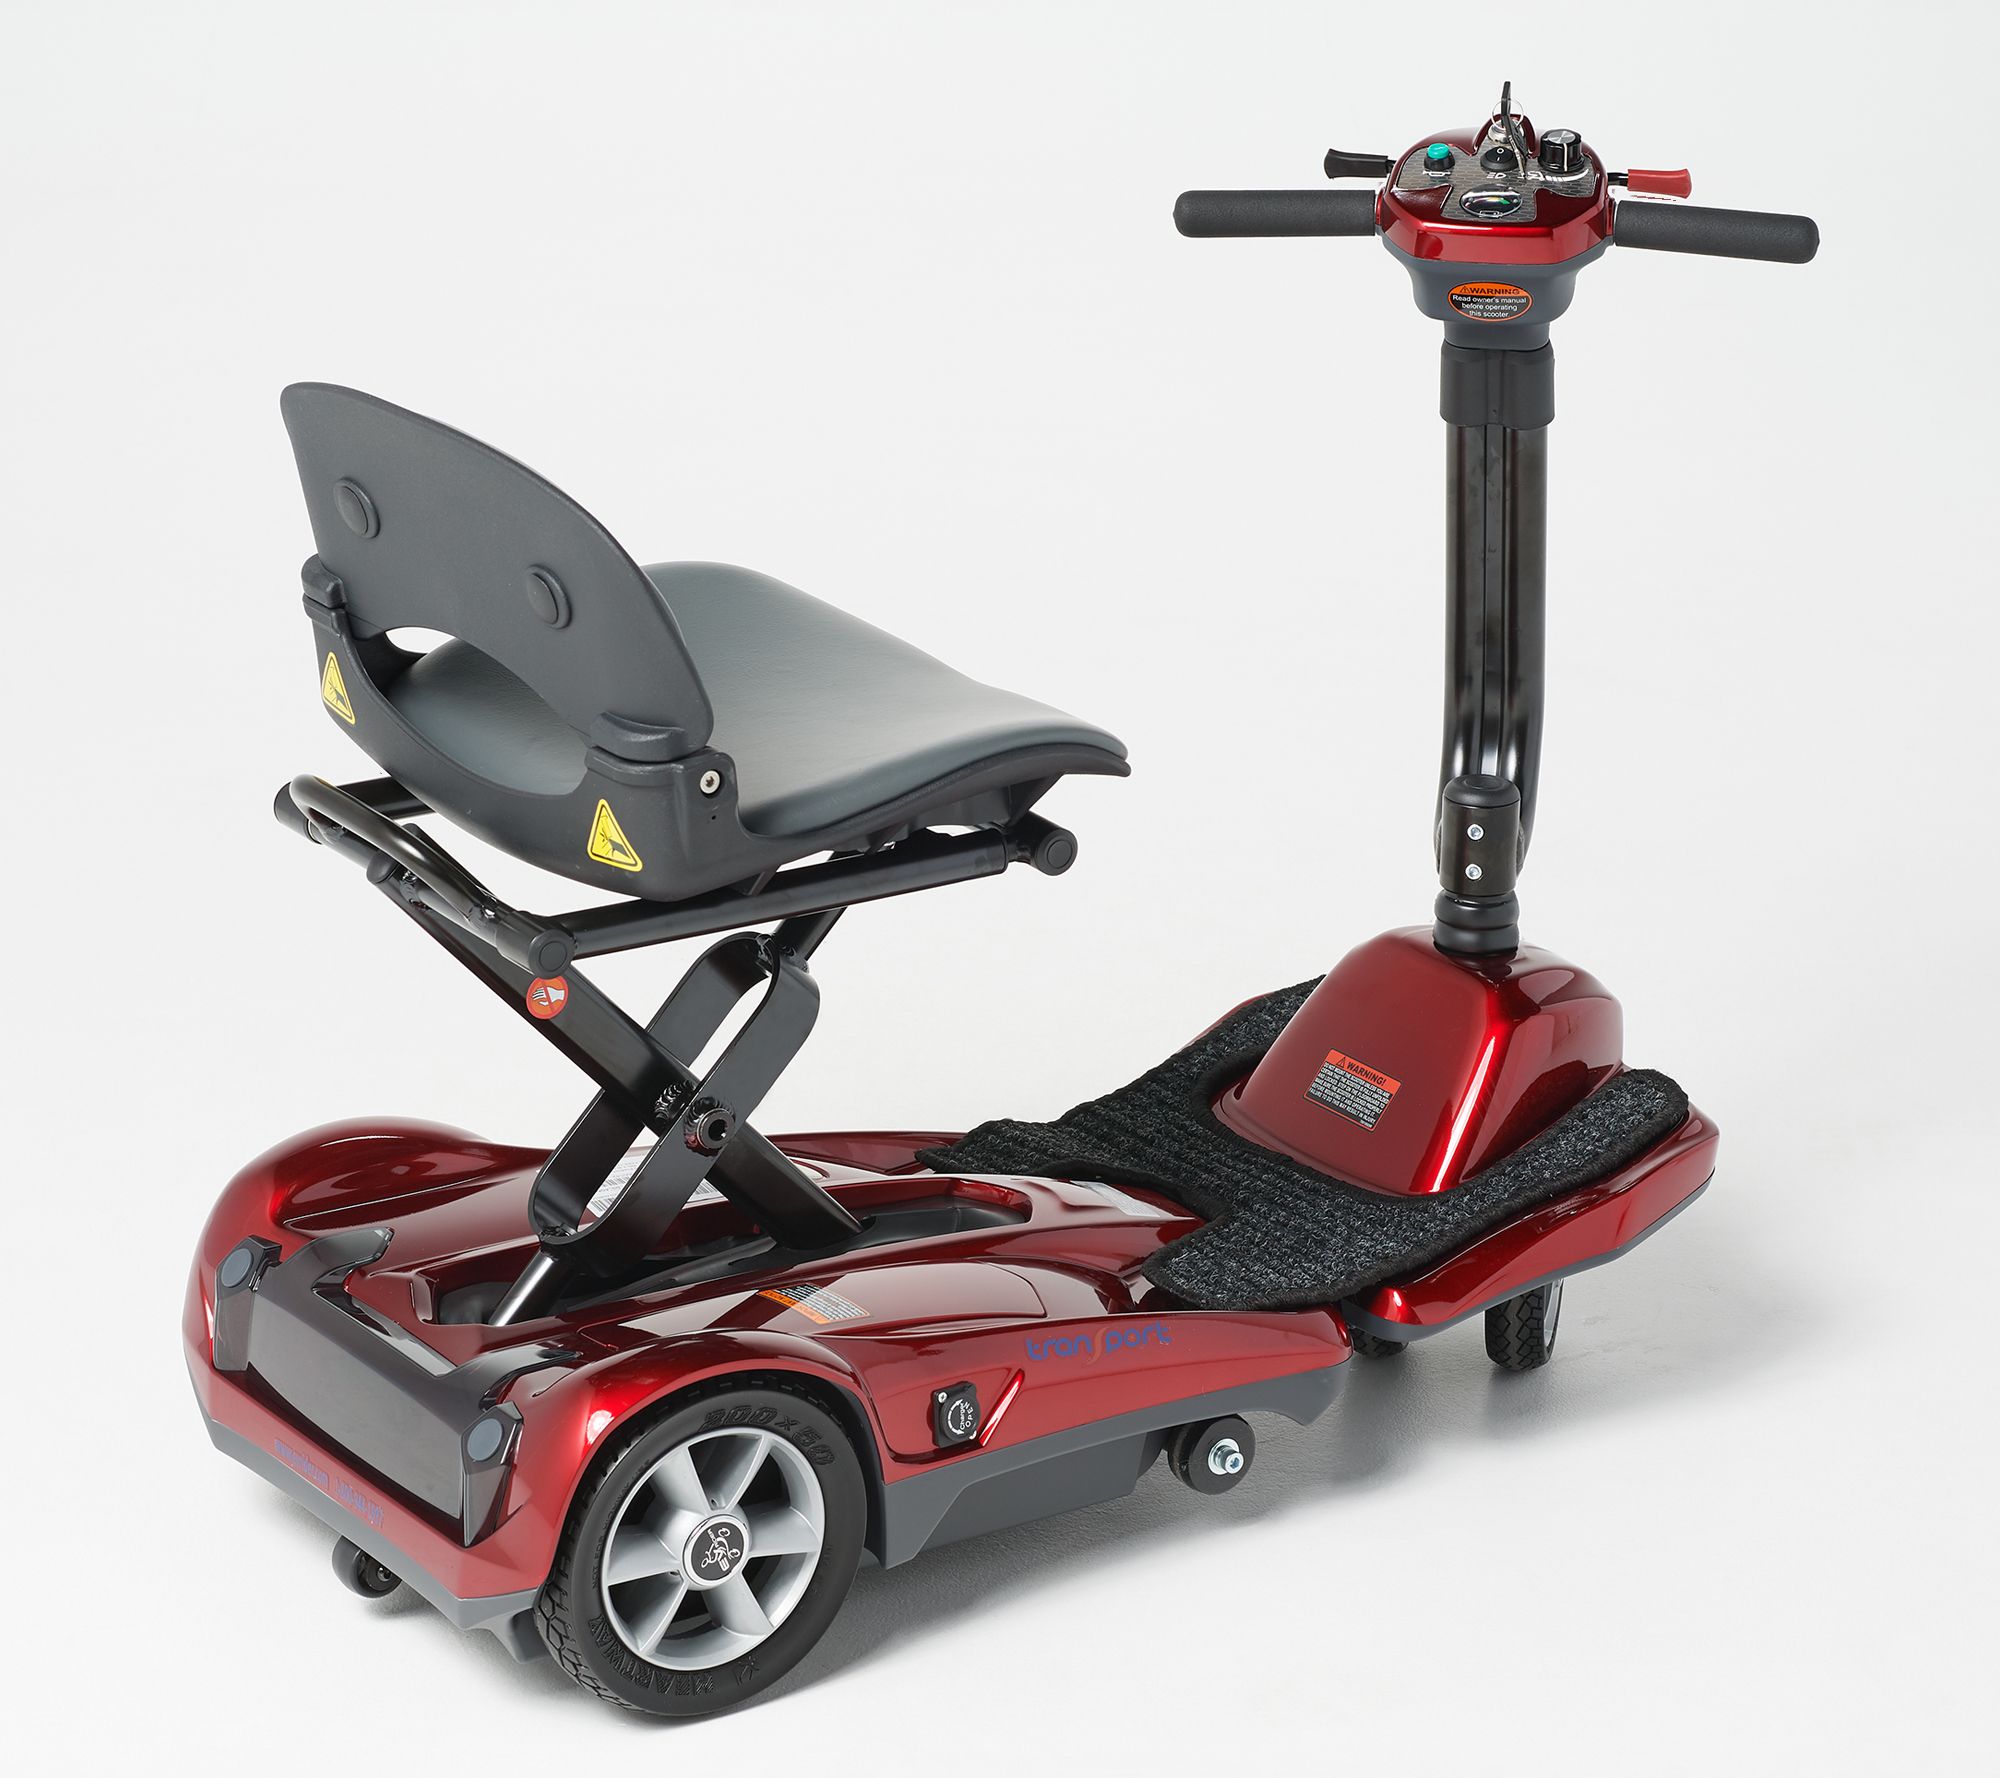 EZy Roller Drifter Ride On with Extendable Bars on QVC 